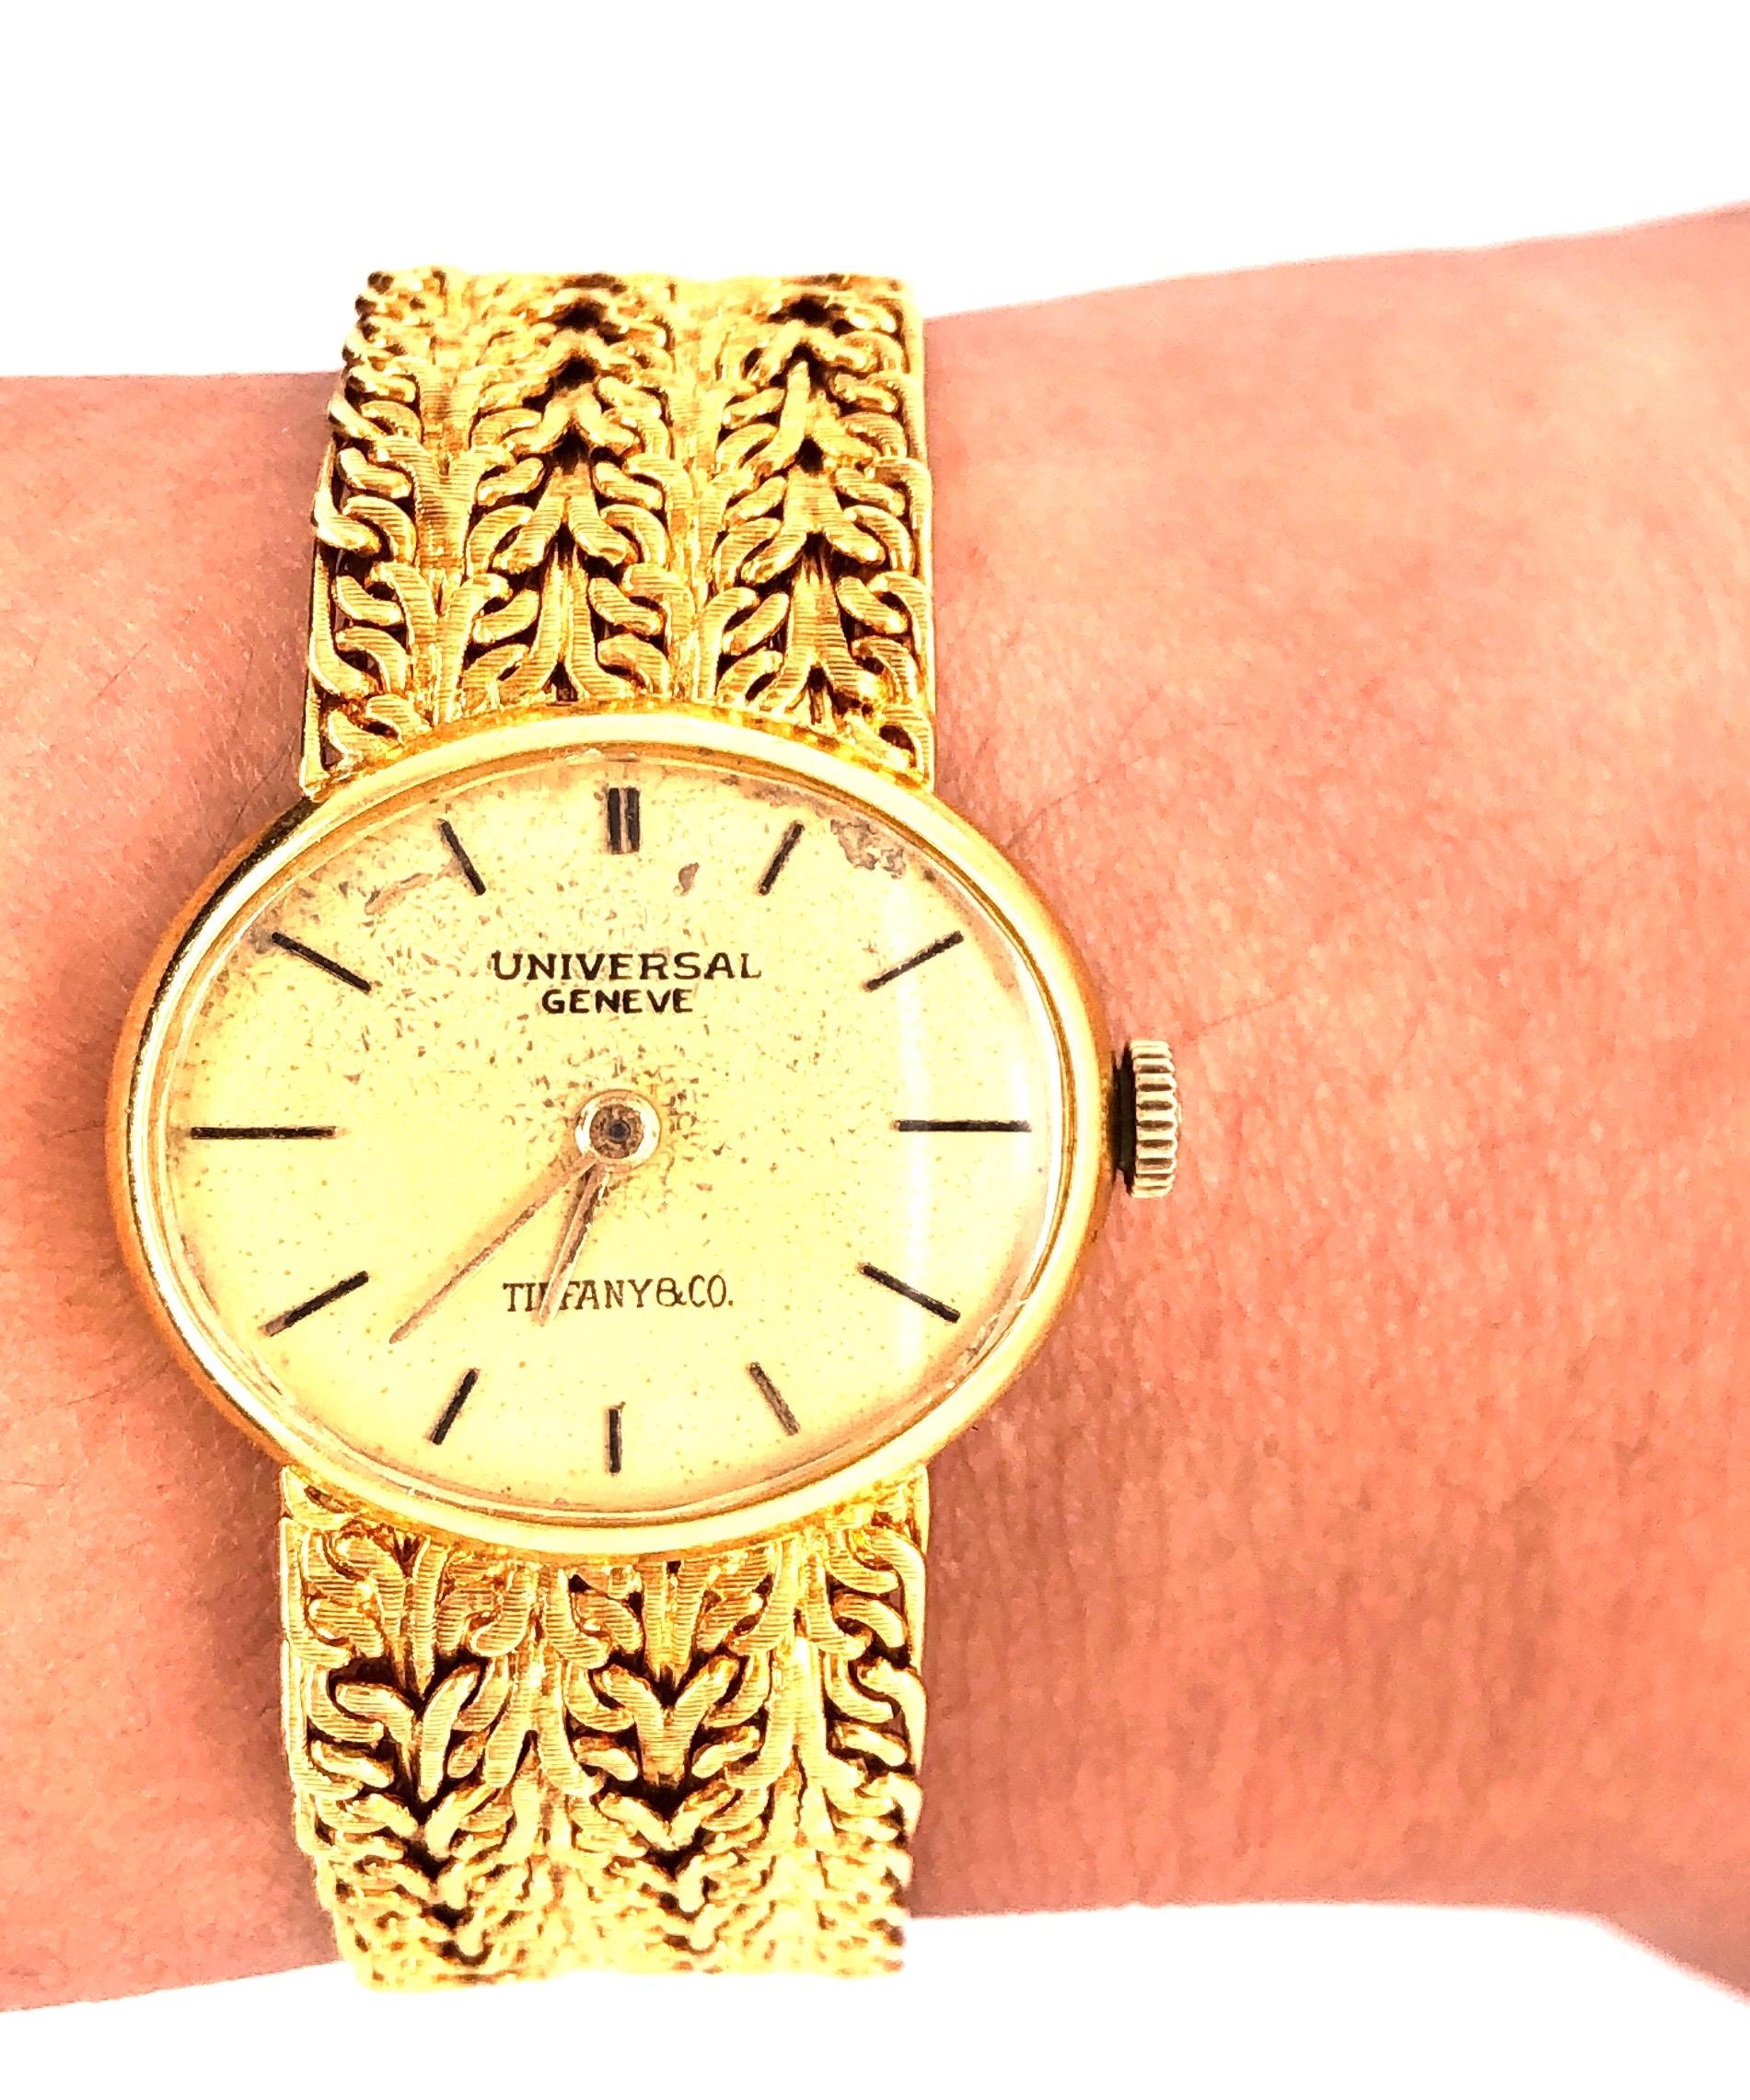 Tiffany & Co Attributed Stamped Ladies Universal Geneve 18 Karat Gold Watch and Band. Having an impressive 41.7 grams of 18Kt gold. Unadjusted 17 Jewels. This watch is presently working. This is a preowned item that can use a bit of cleaning. 
Lia